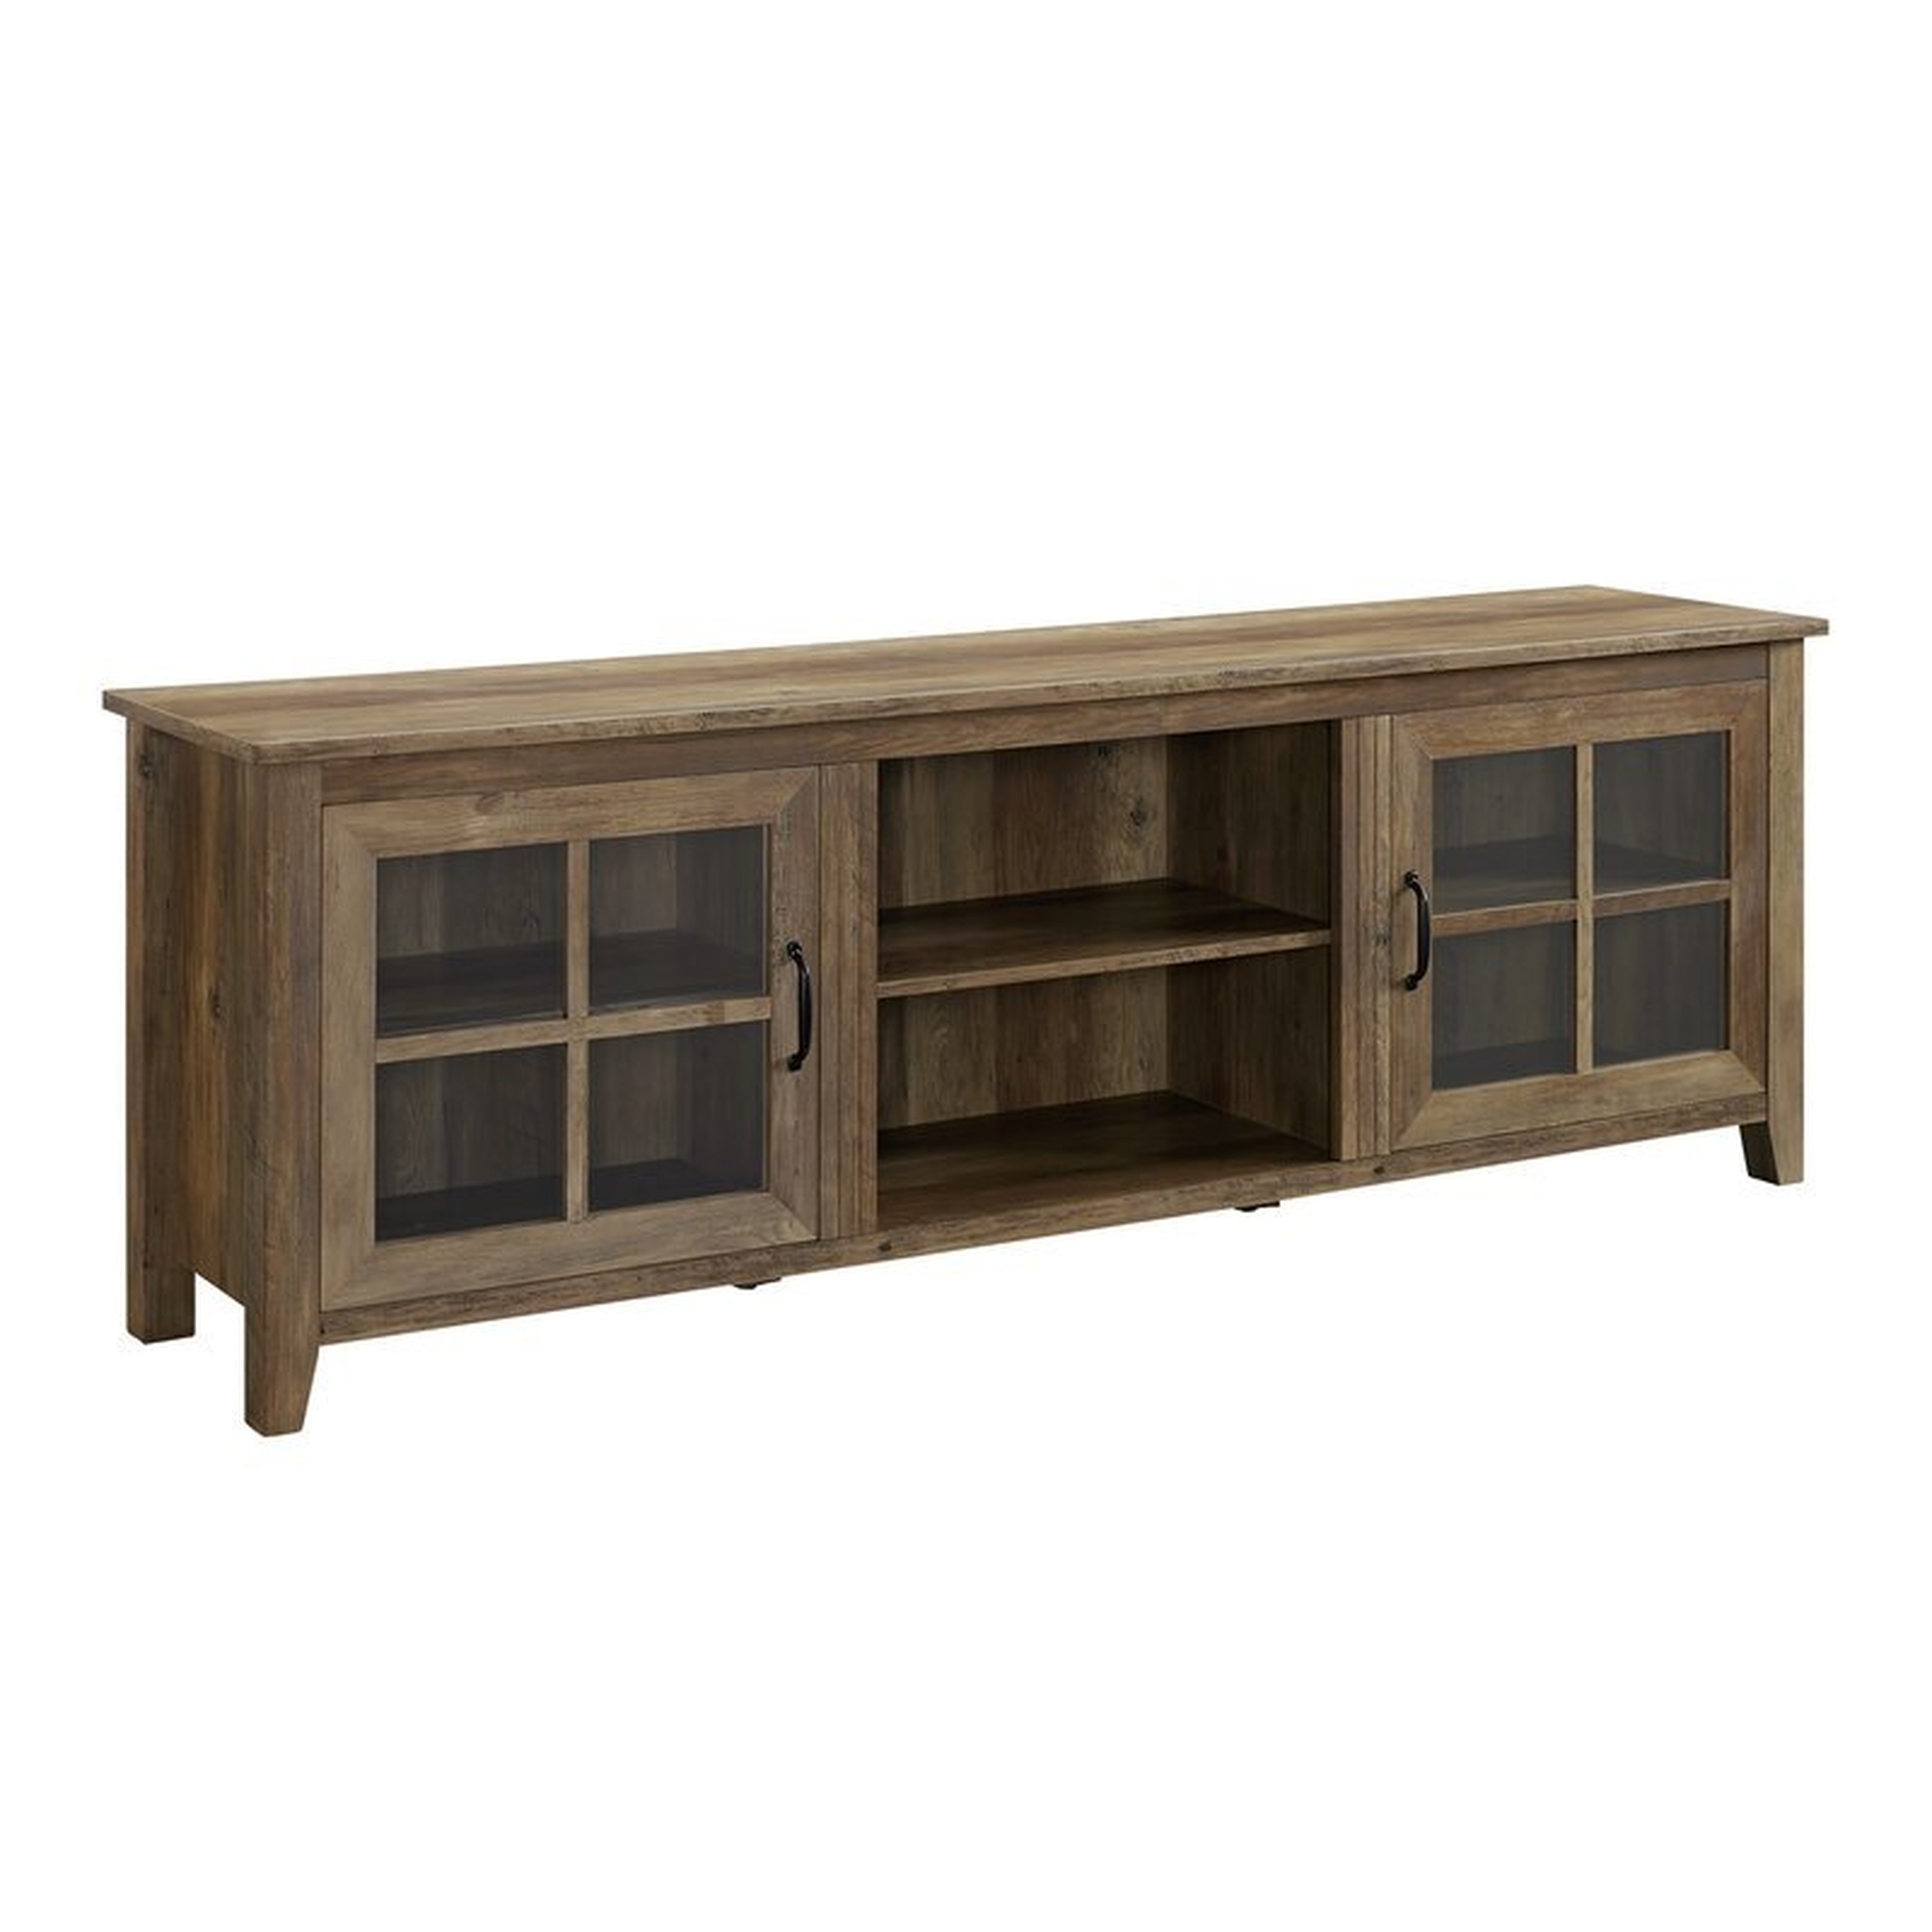 Dake TV Stand for TVs up to 78 inches - Reclaimed Barnwood - Wayfair